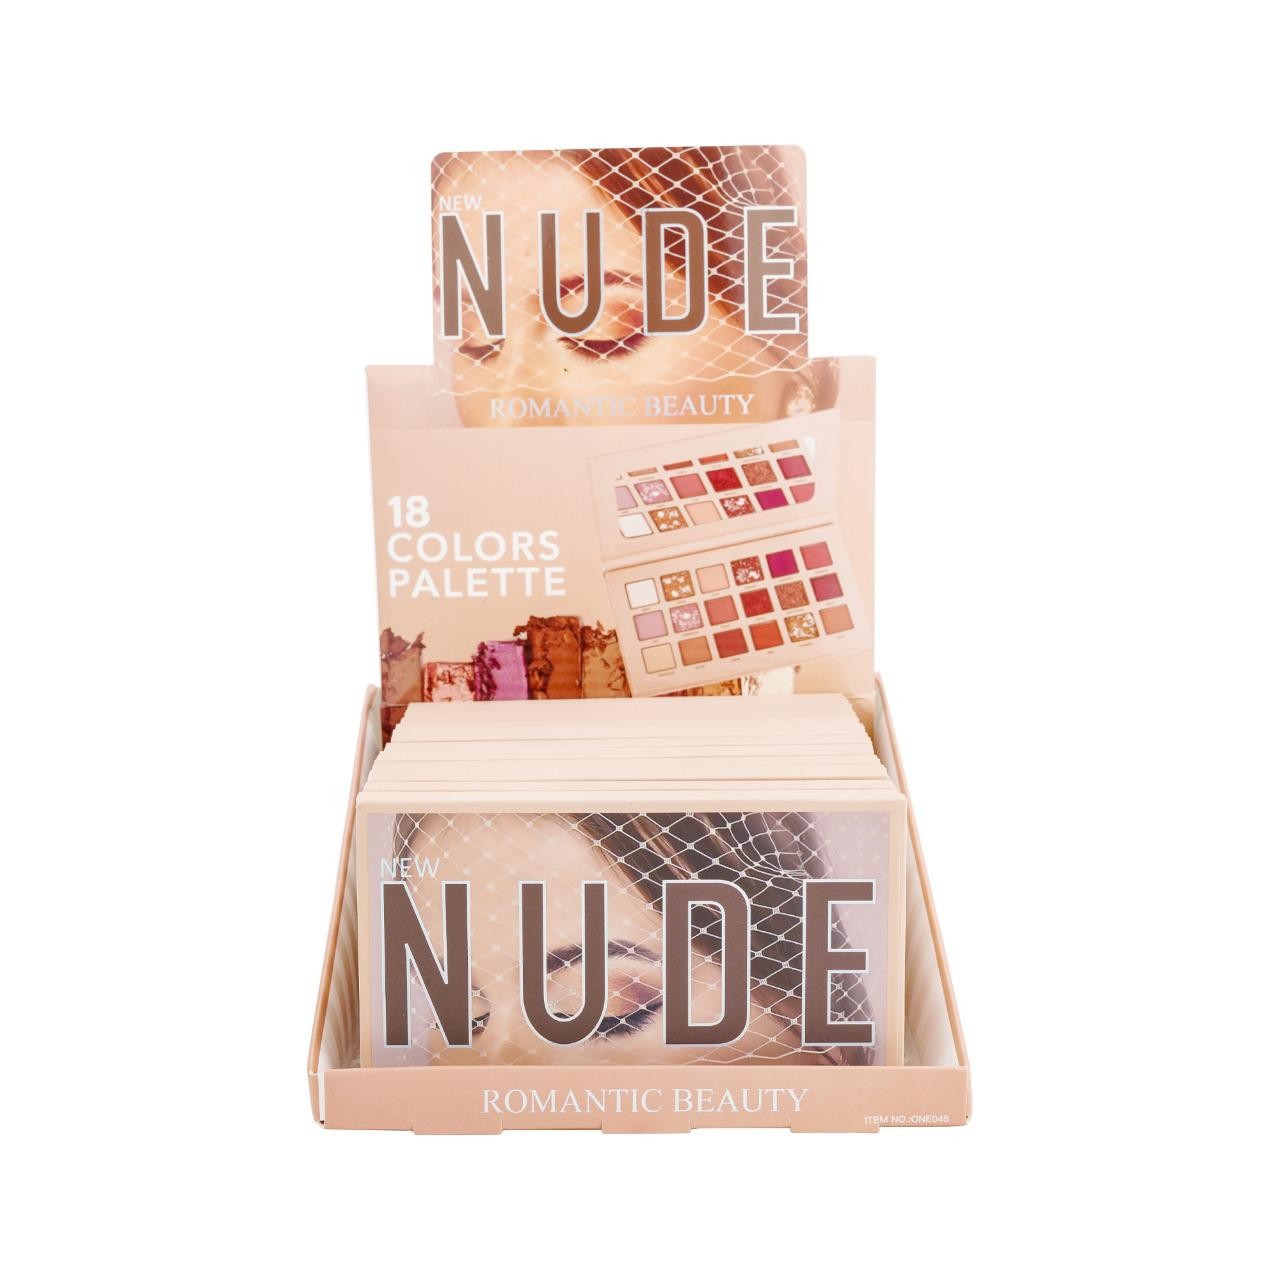 PACK 12 UNIDADES. SOMBRA. NUDE 18 COLORS,